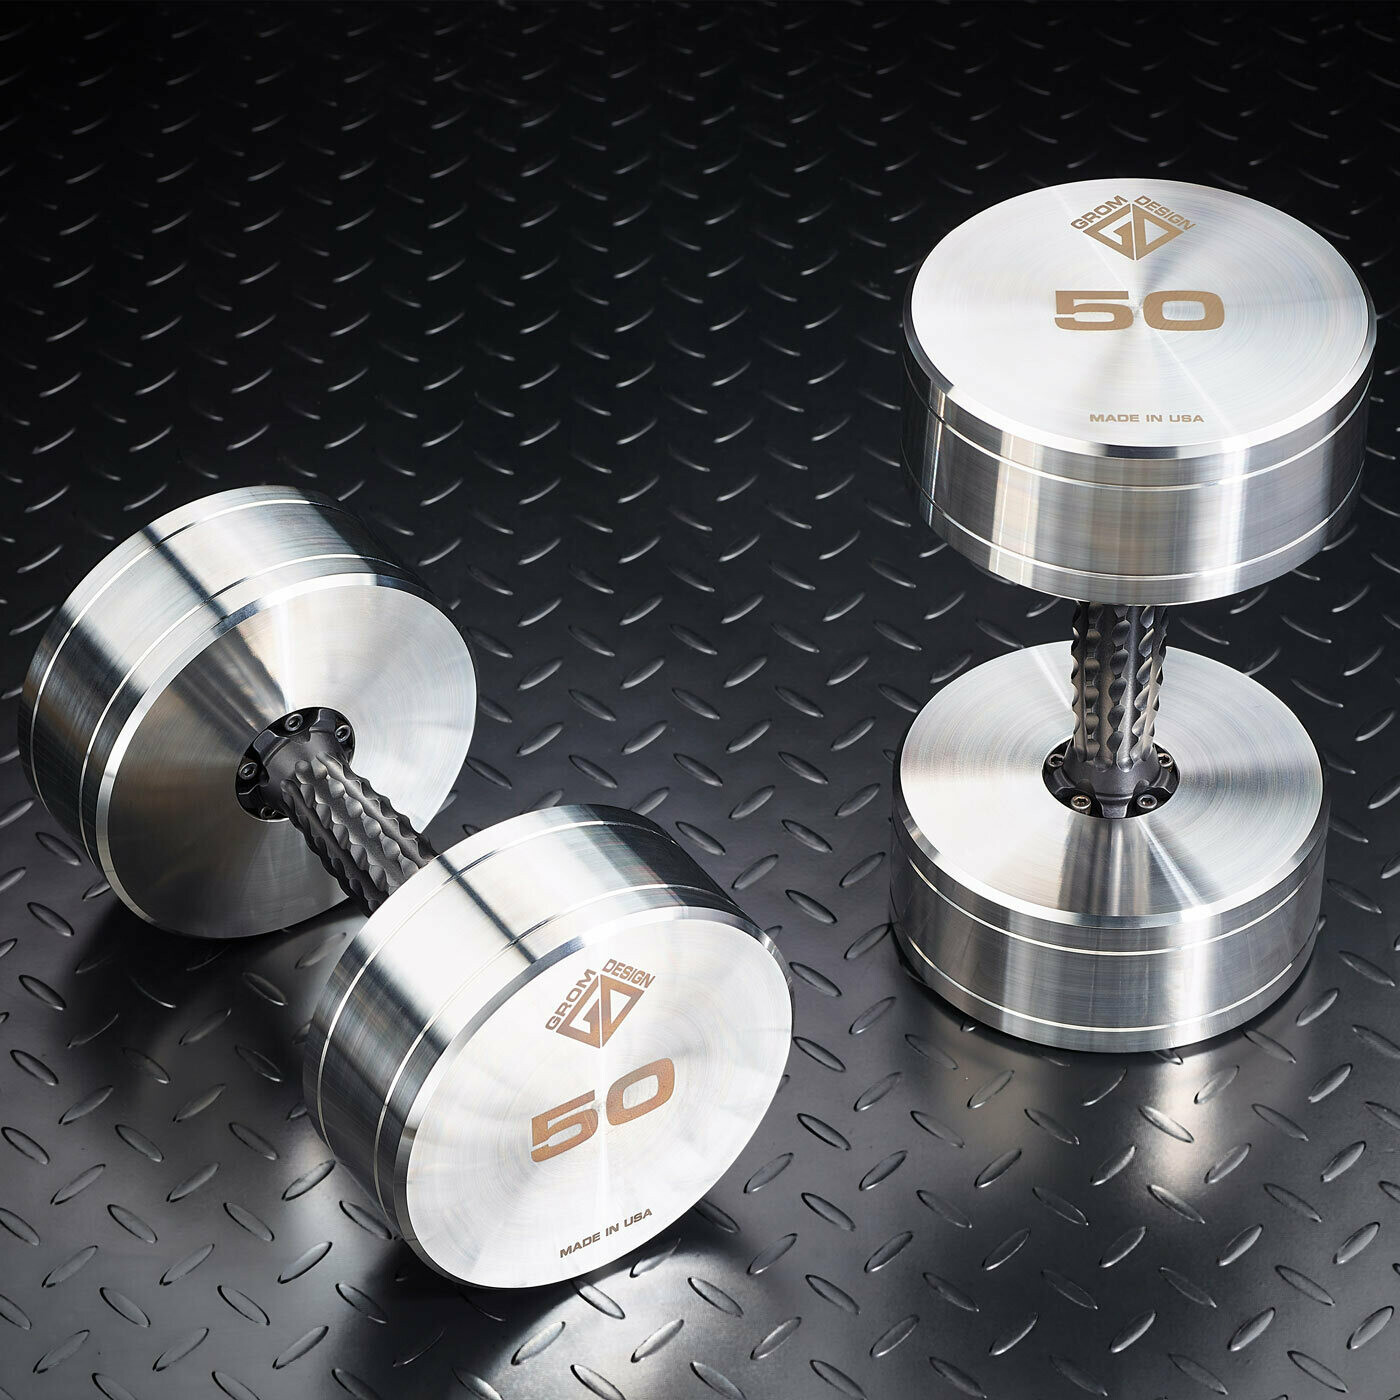 50 pound dumbbells Made in USA Stainless Steel CNC Machined